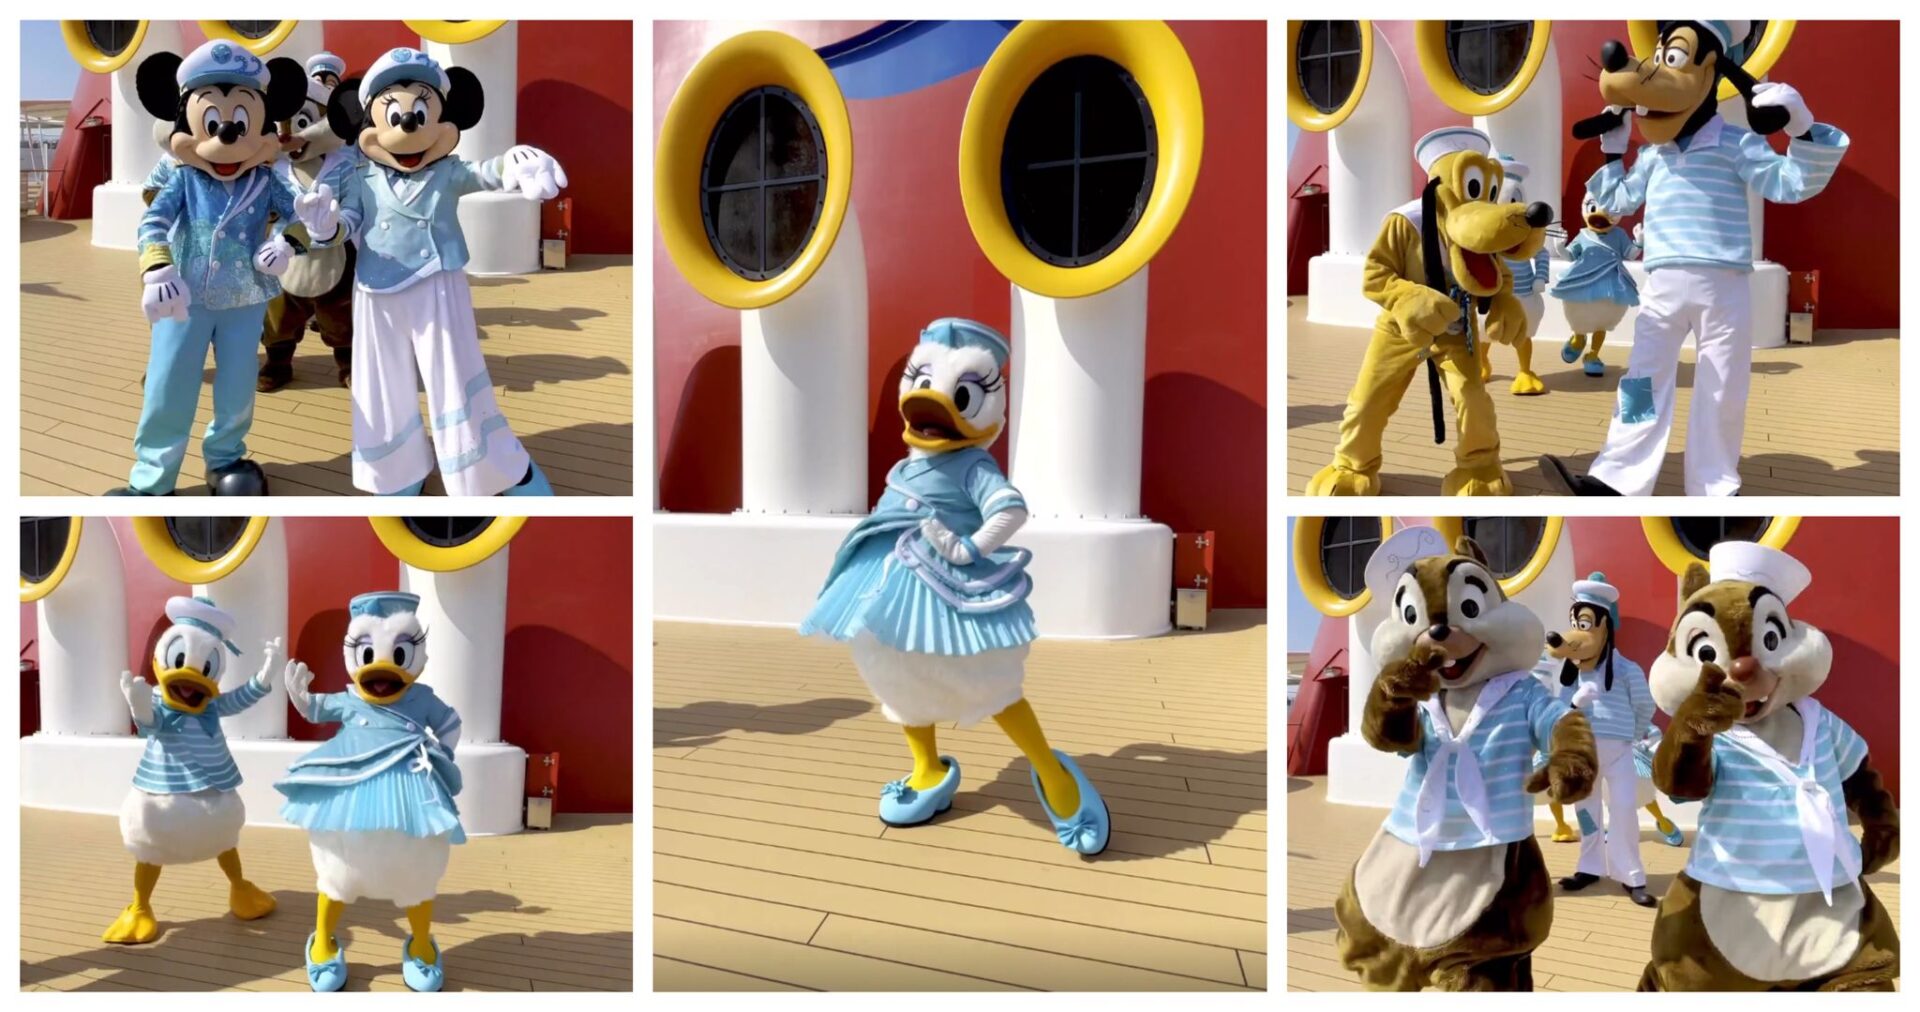 Disney Characters Debut New Disney Cruise Line 25th Anniversary Looks